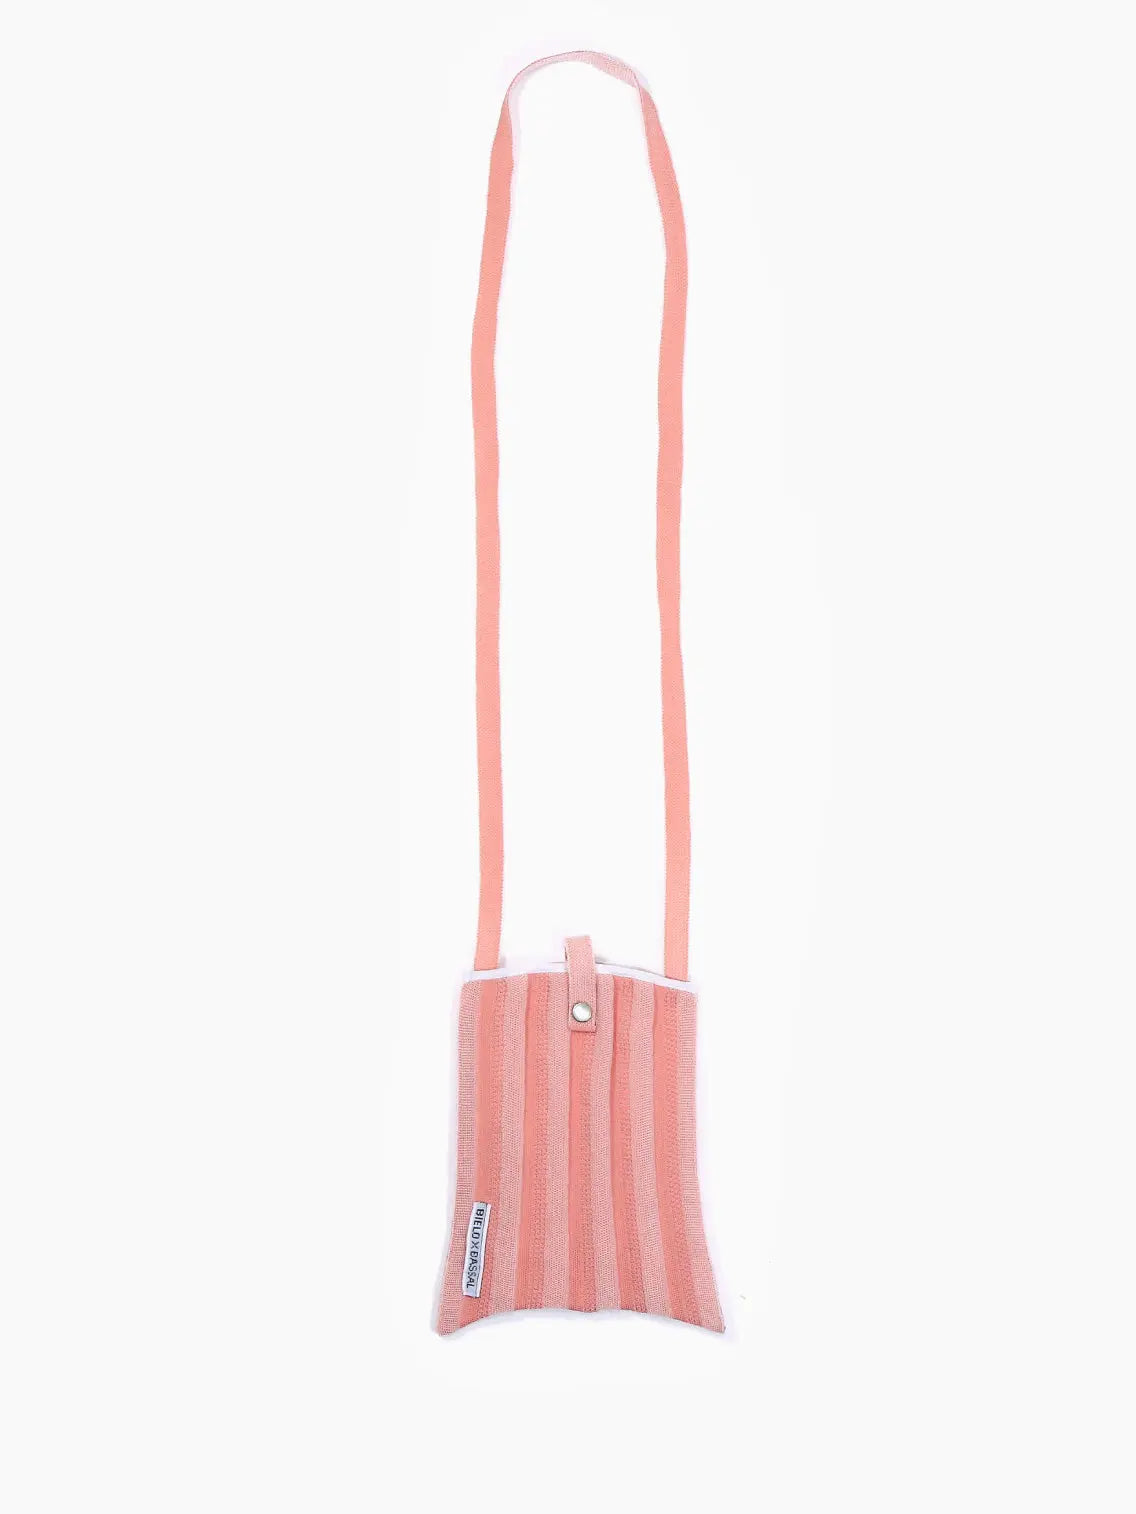 A pink and white striped fabric Pink Shoulder Bag with a top snap closure and a long strap. The Pink Shoulder Bag, available on BassalStore, has a small label on the side that reads "STICK with STYLE." The background is white, making it perfect for your next shopping trip in Barcelona.